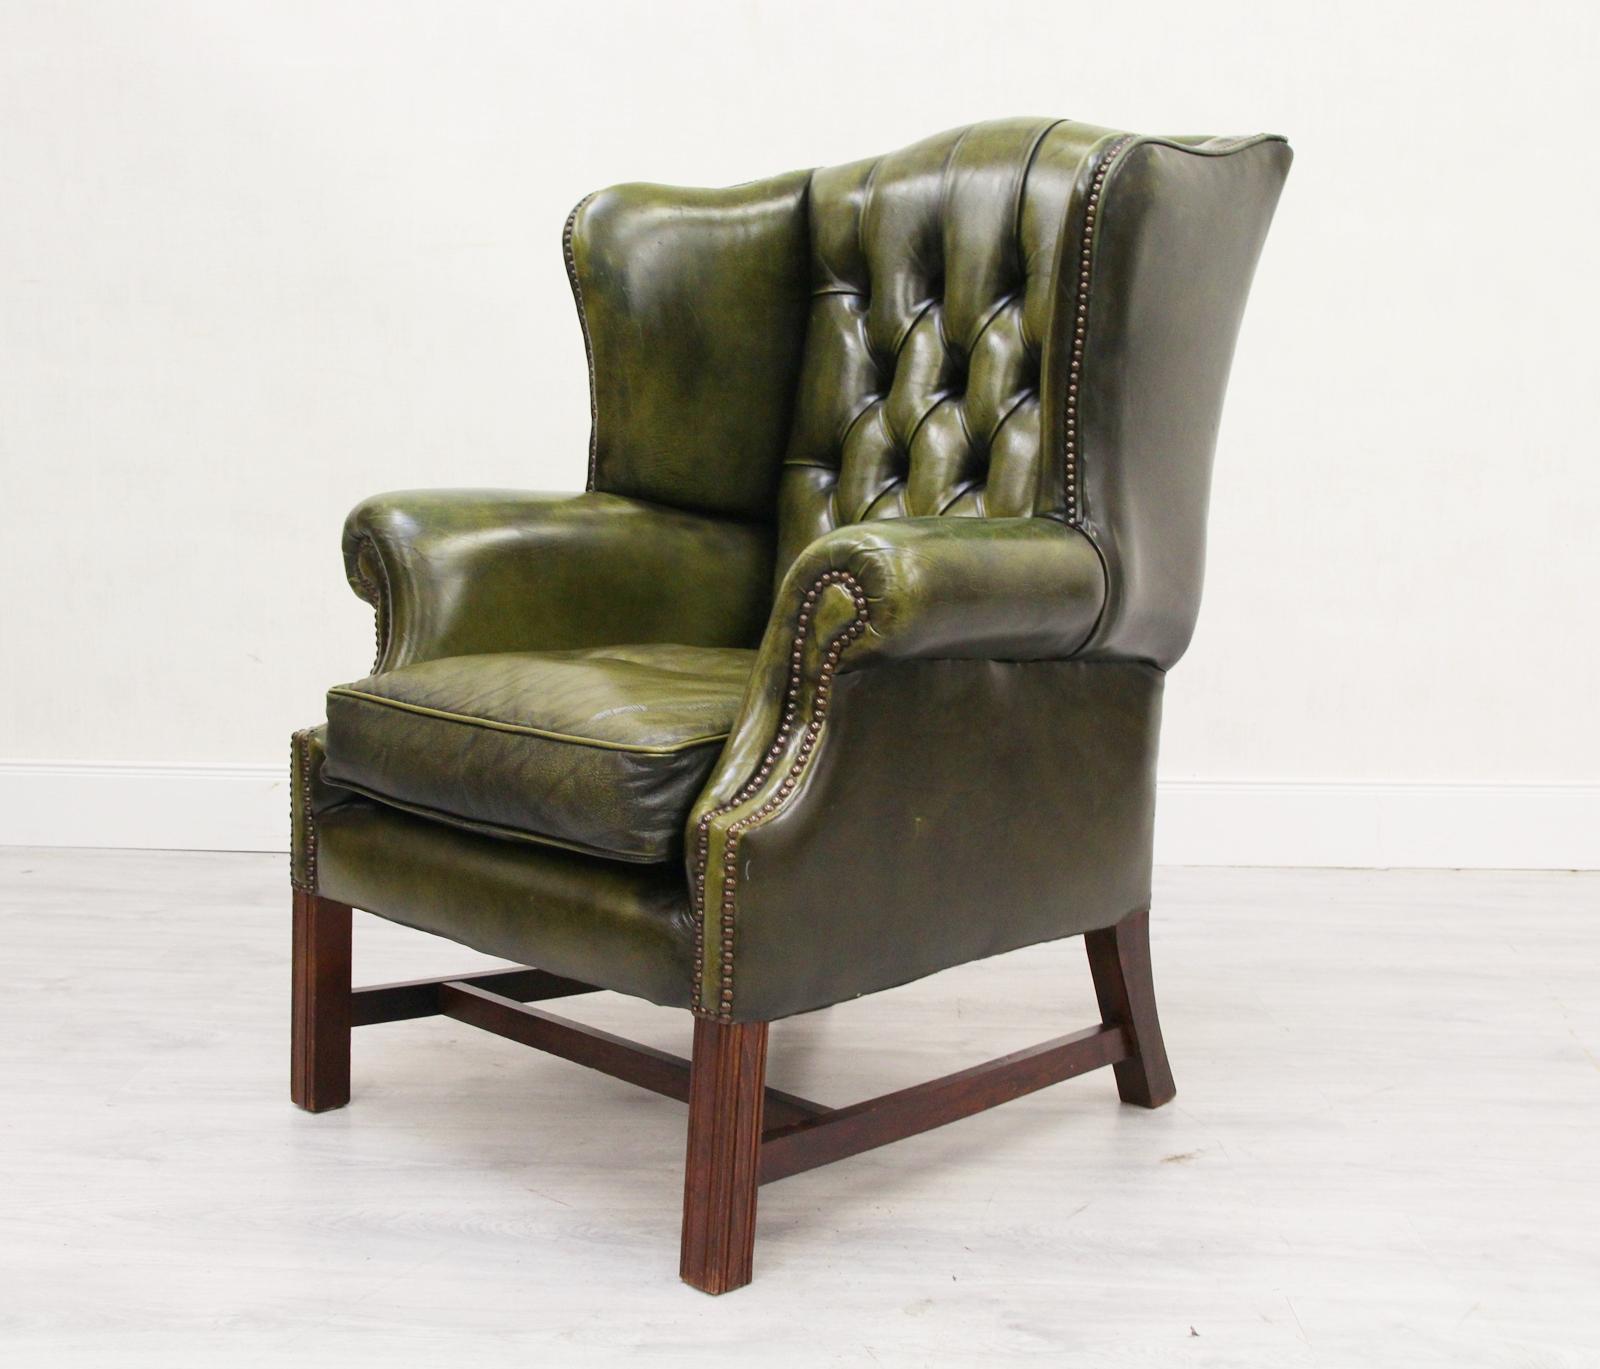 Late 20th Century Chesterfield Wing Chair Armchair Club Chair Baroque Antique For Sale